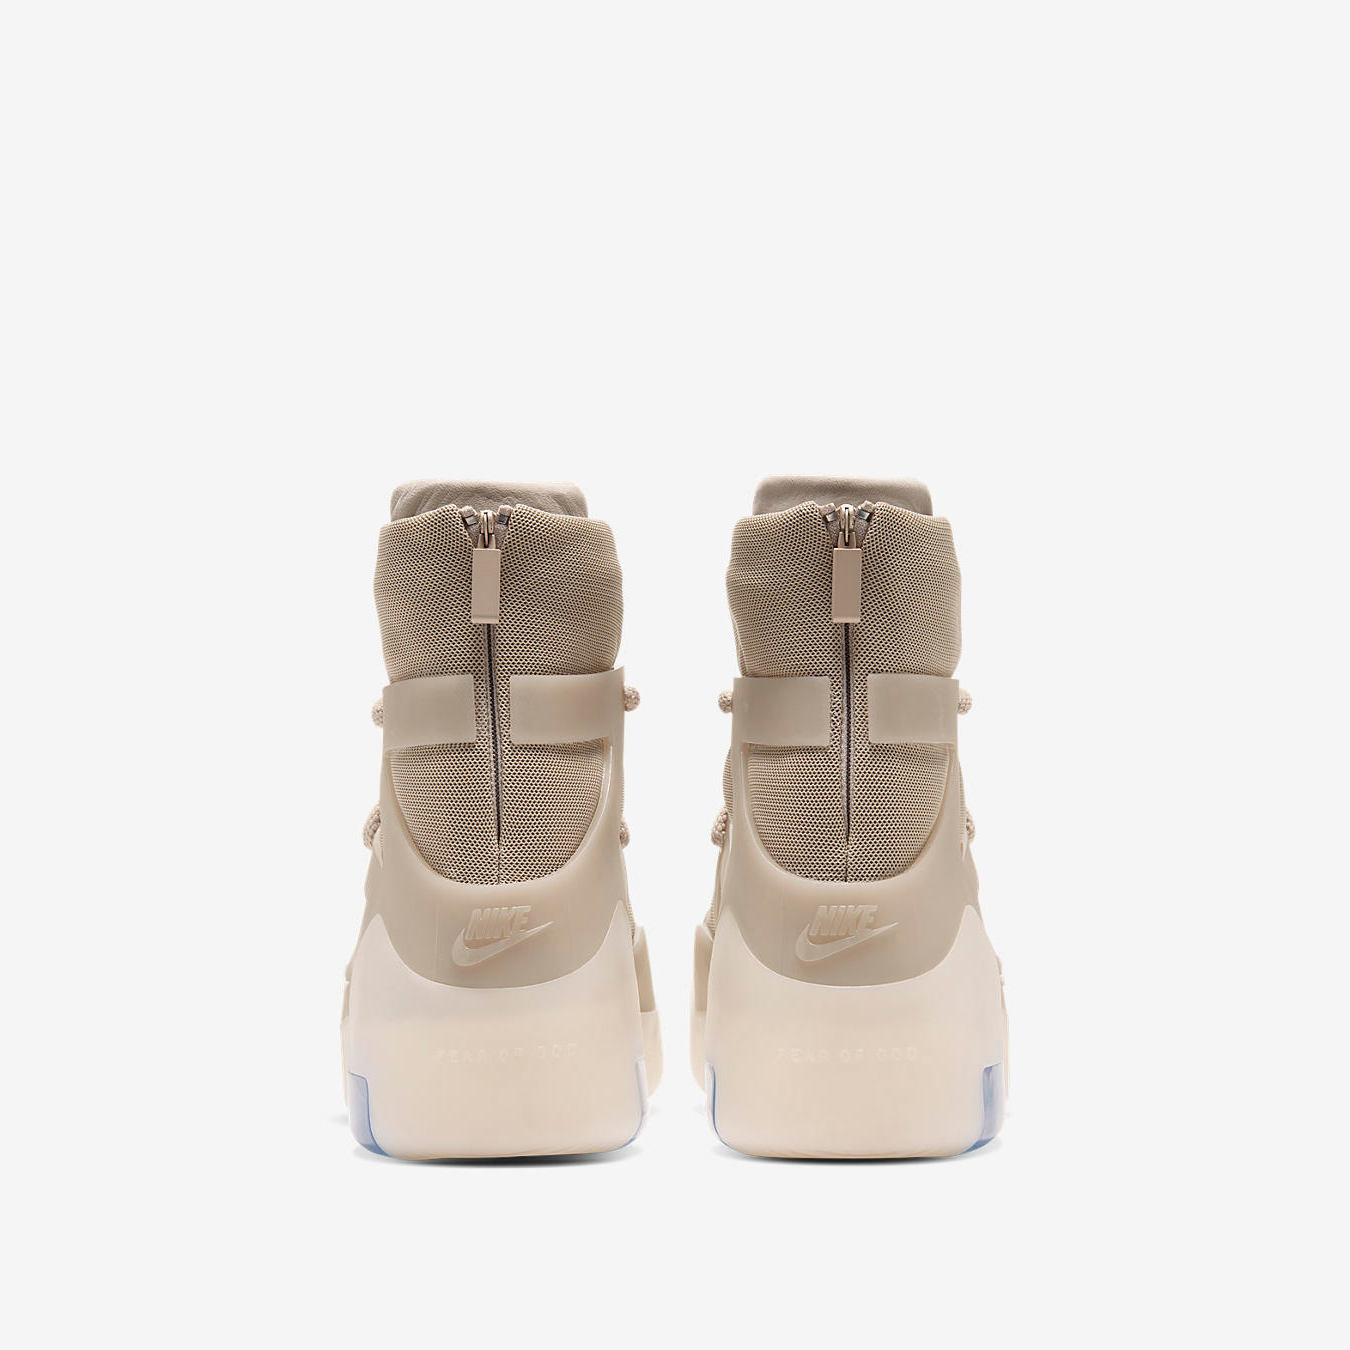 END. Features | Nike Air Fear of God 1 